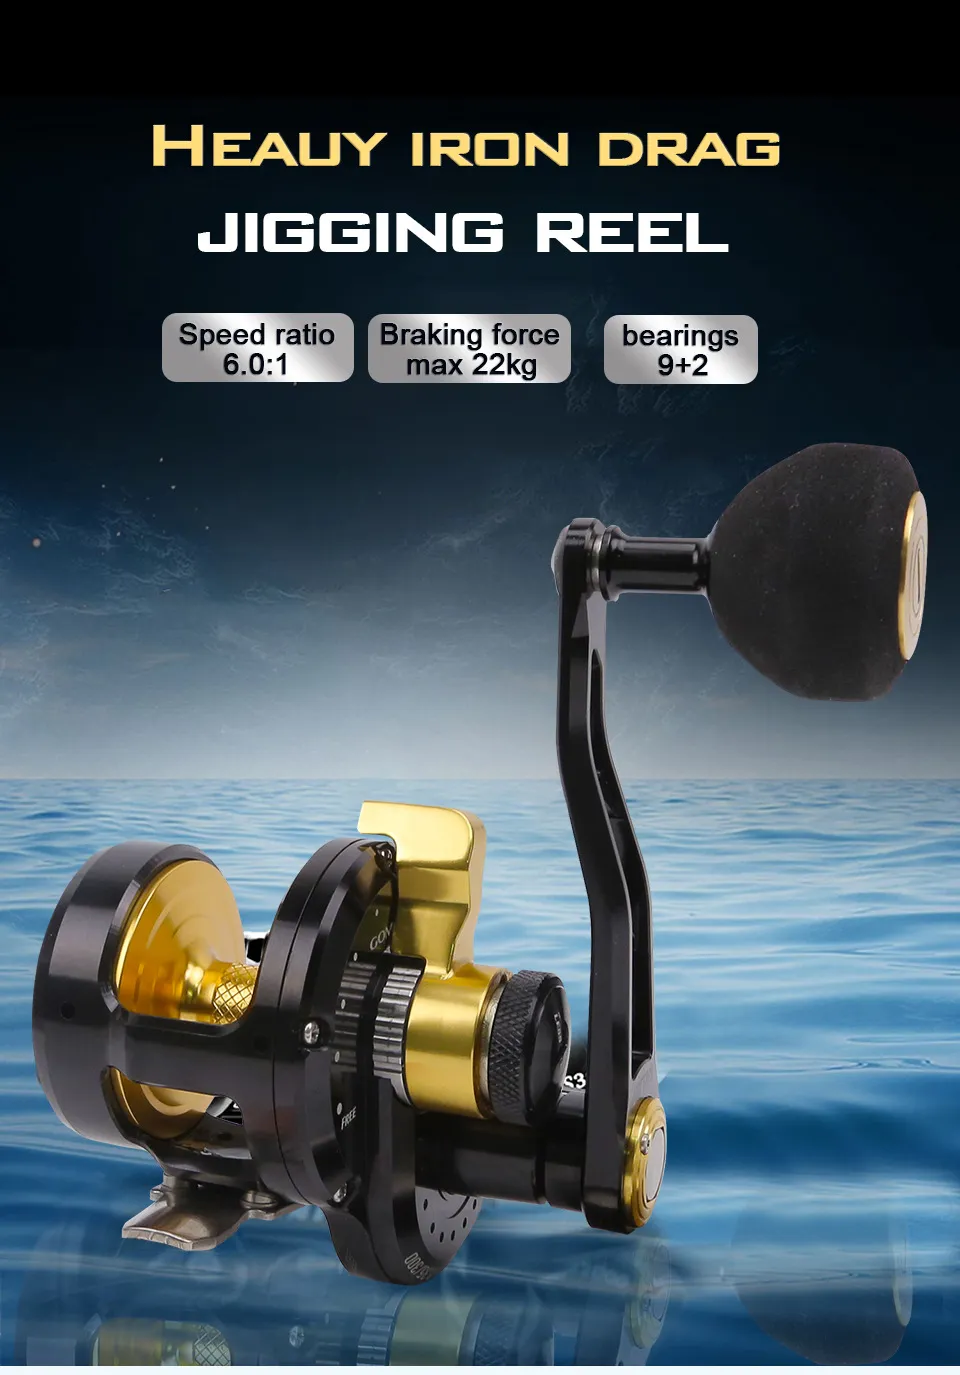 New Style Slow Rolling Iron Plate Fishing Wheel BT200400 Sea Water  Protection Boat Fishing Cast Drum Wheel 25 Kg Brake Force2950095 From Ozes,  $127.24